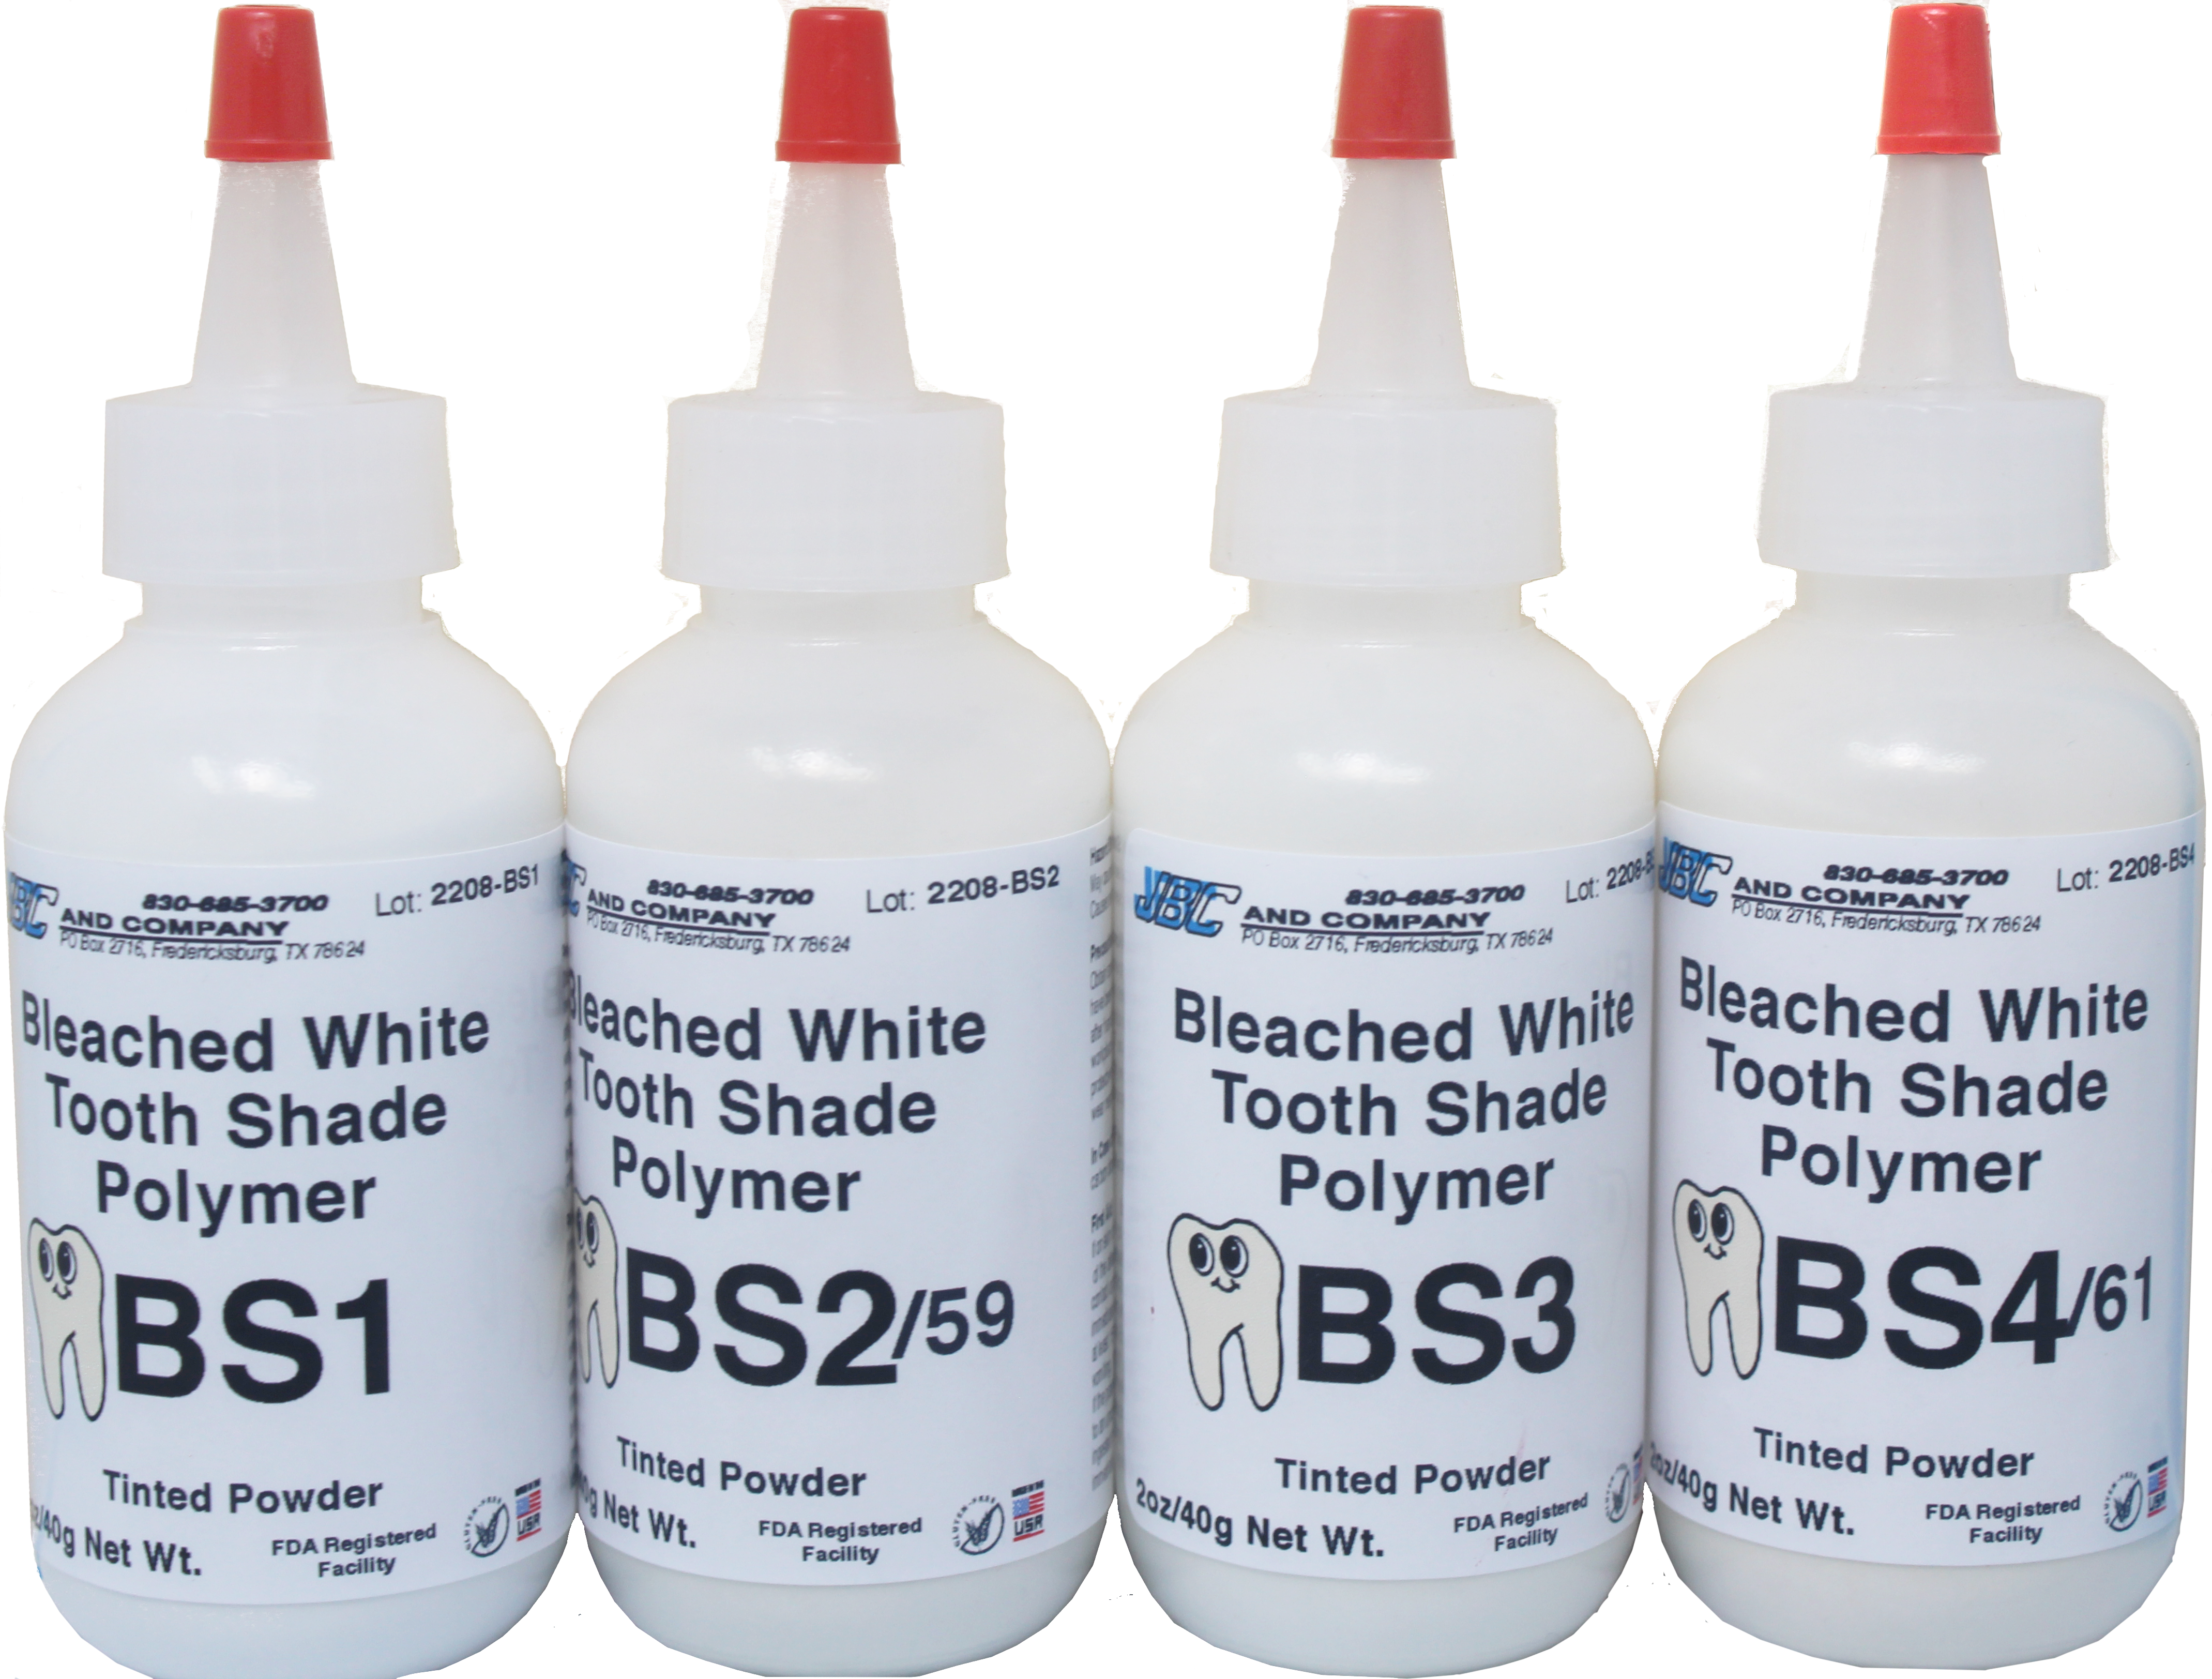 BS: 'BLEACHED' SHADES COLD CURE POWDER